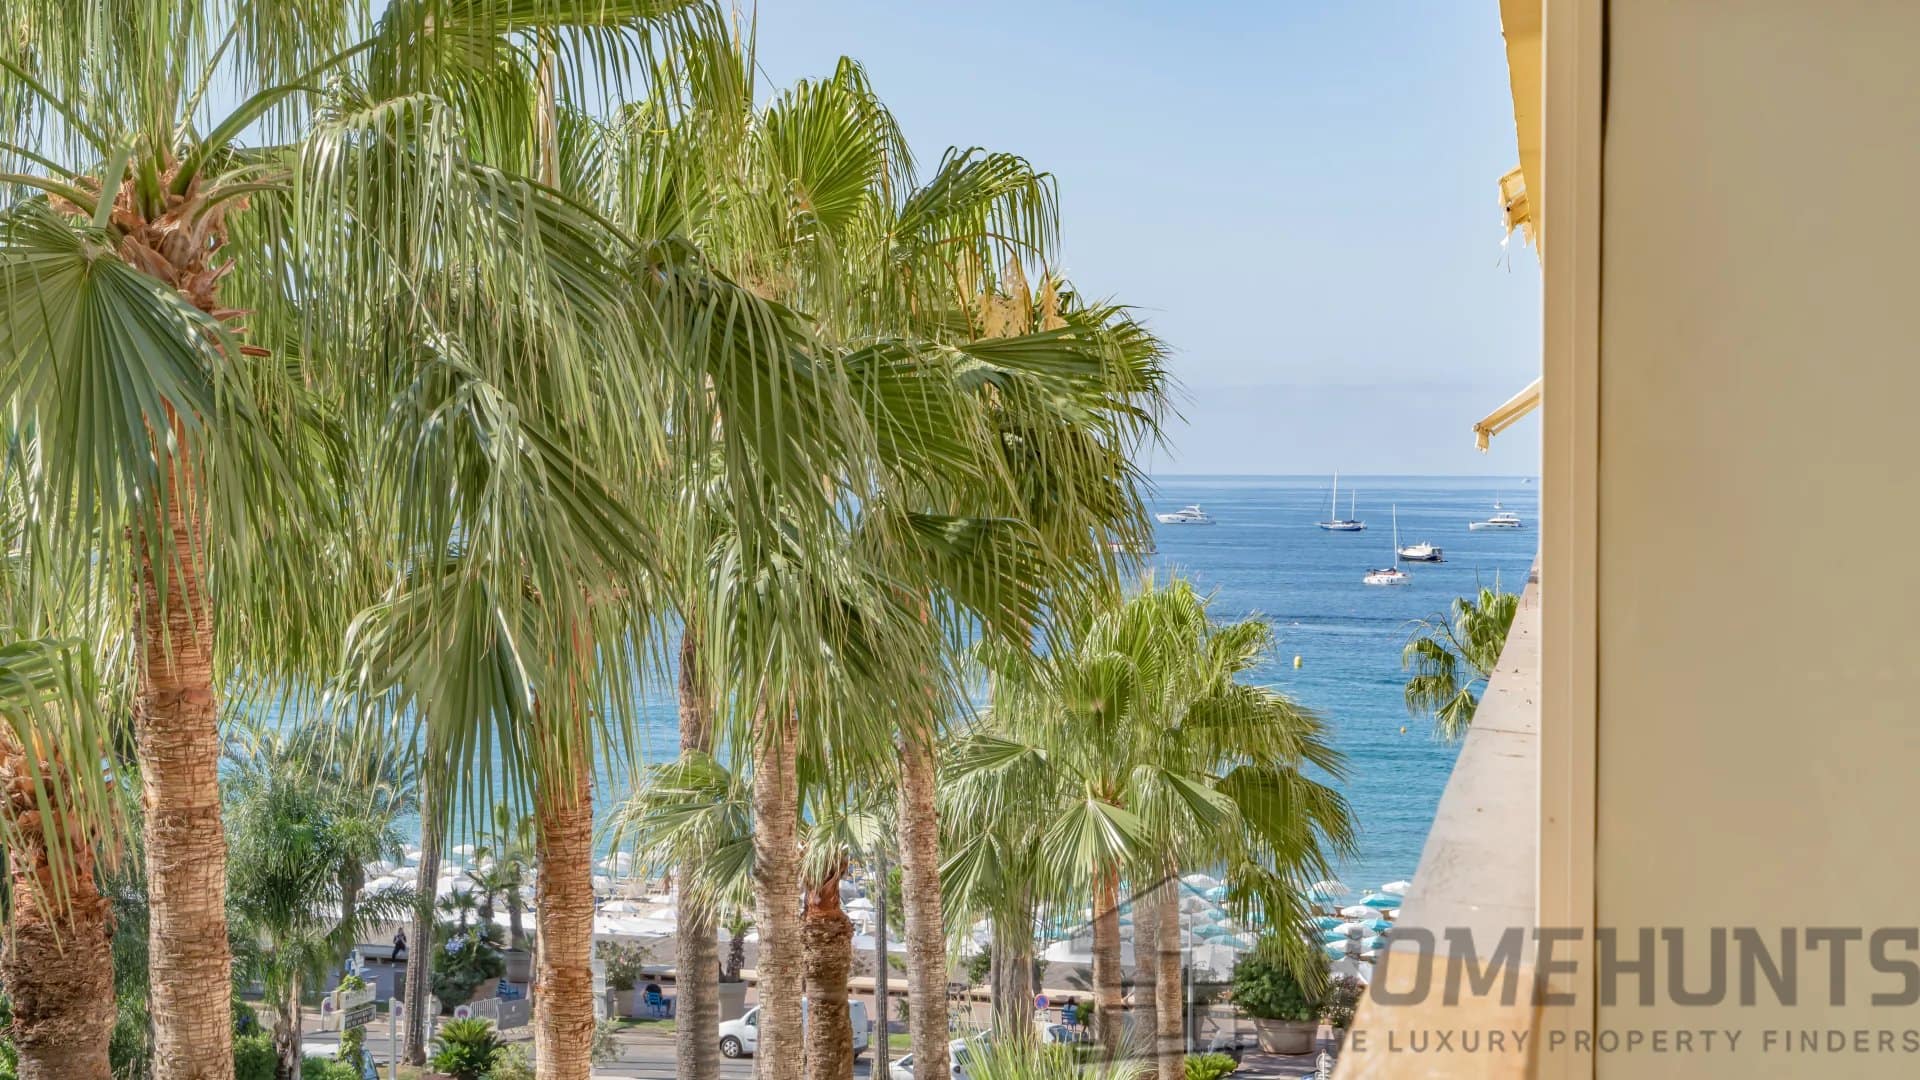 3 Bedroom Apartment in Cannes 58